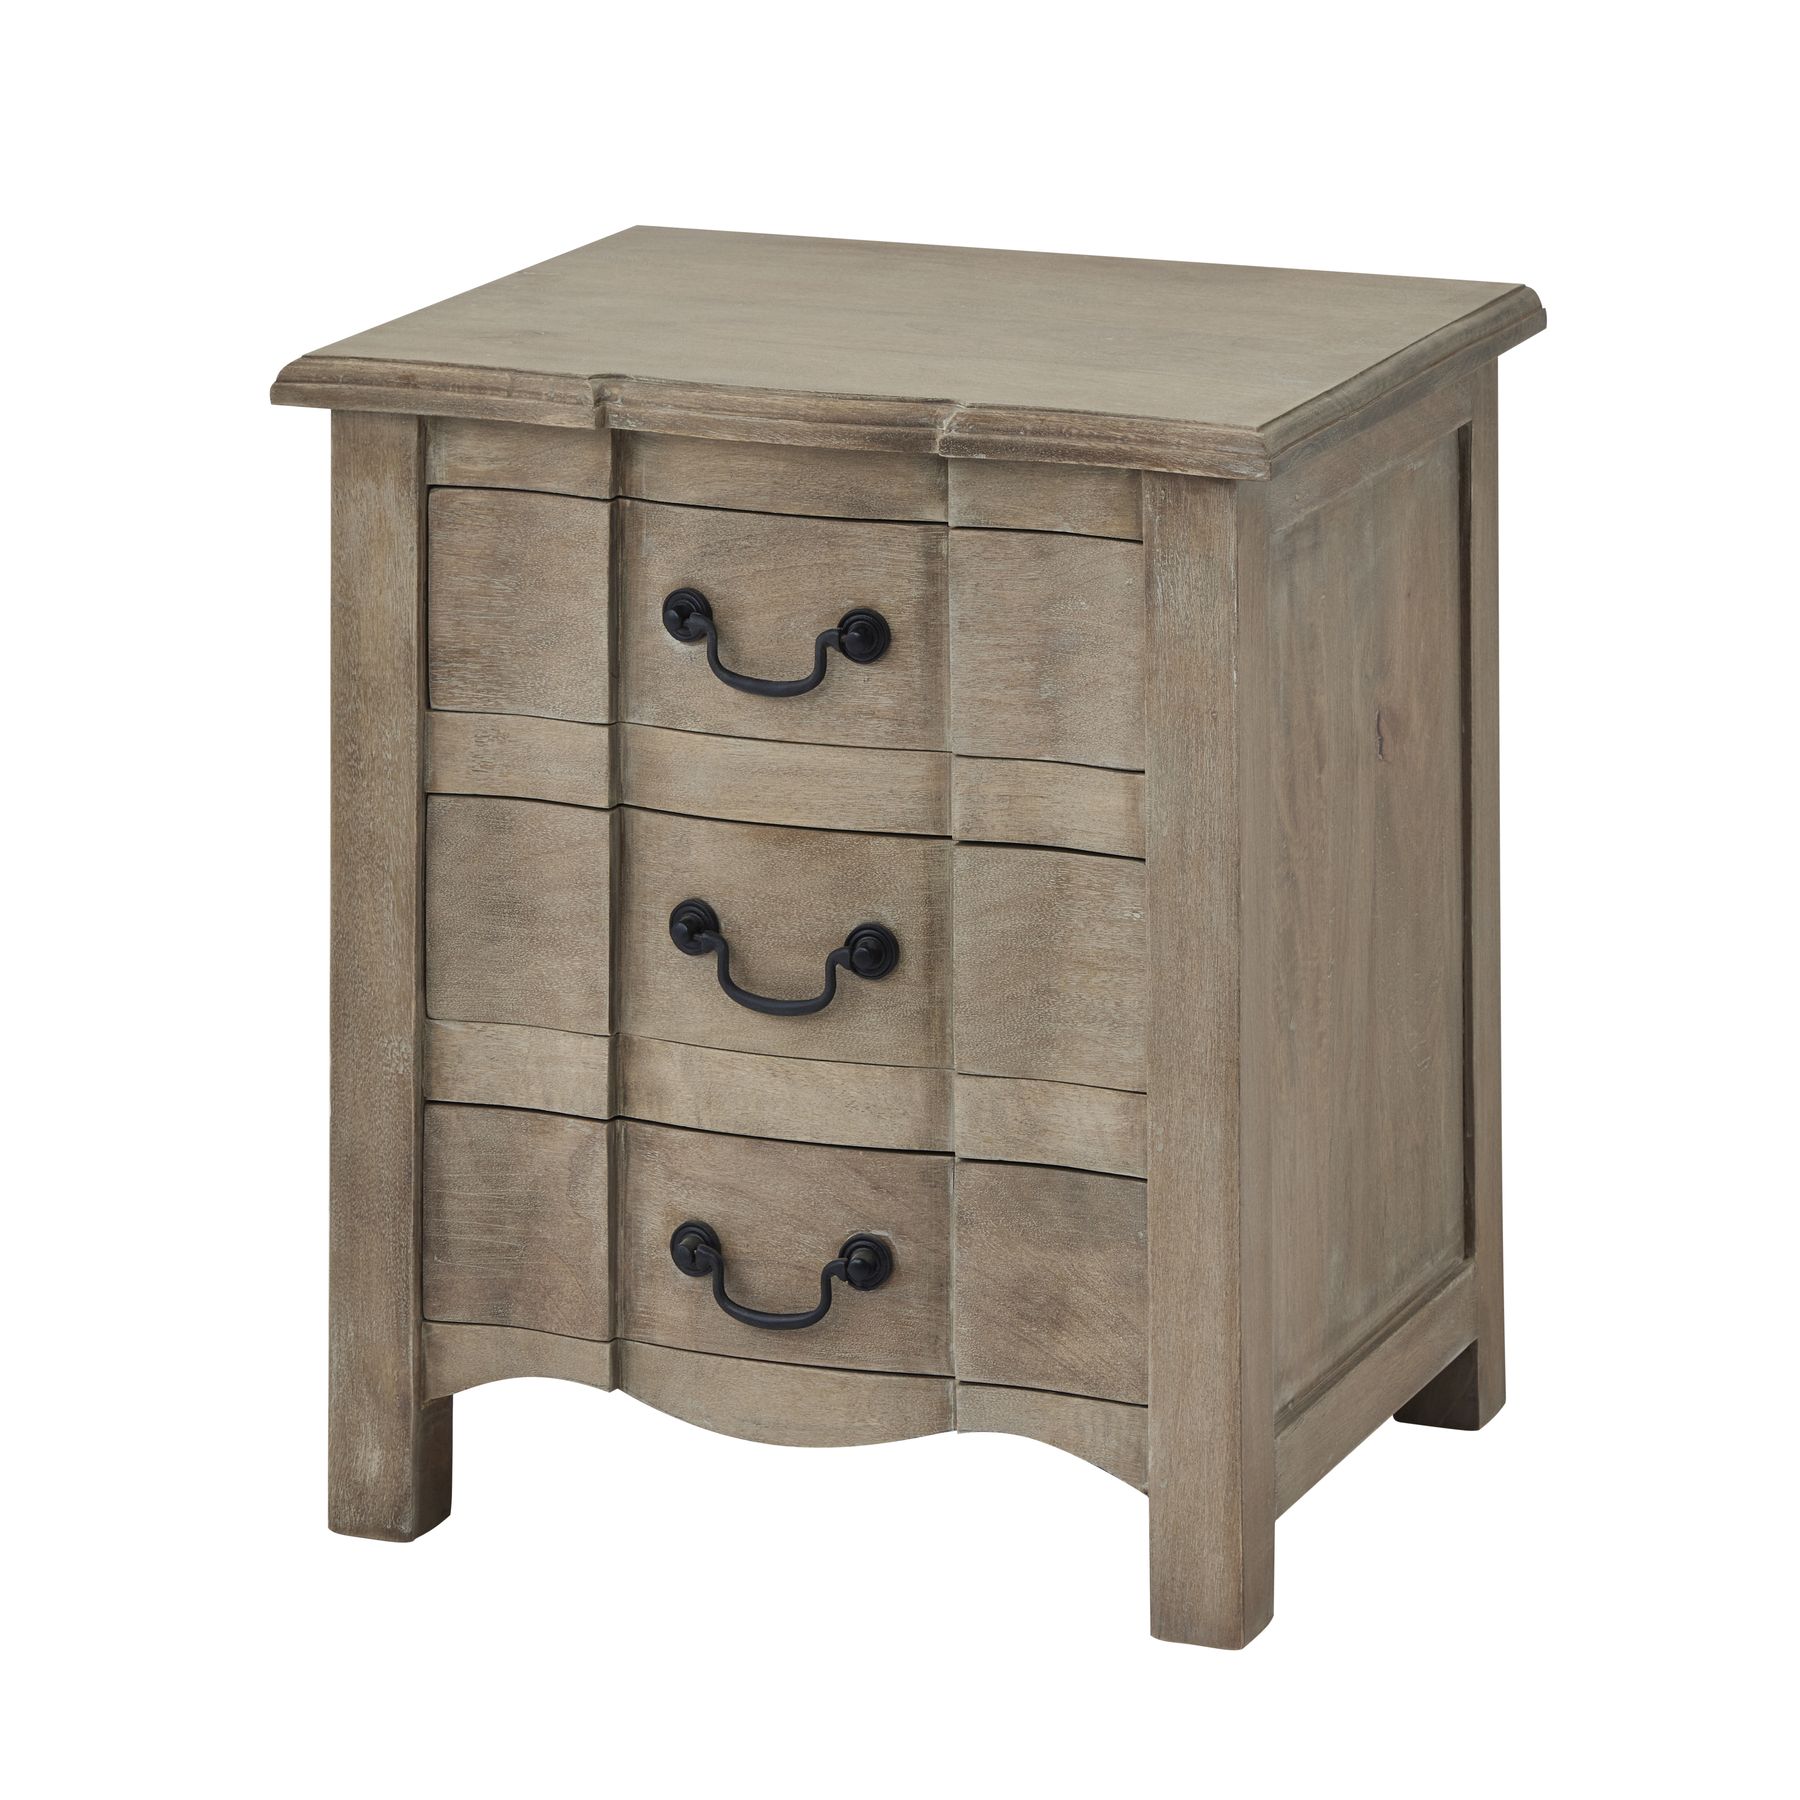 Copgrove Collection 3 Drawer Bedside Table - Image 1